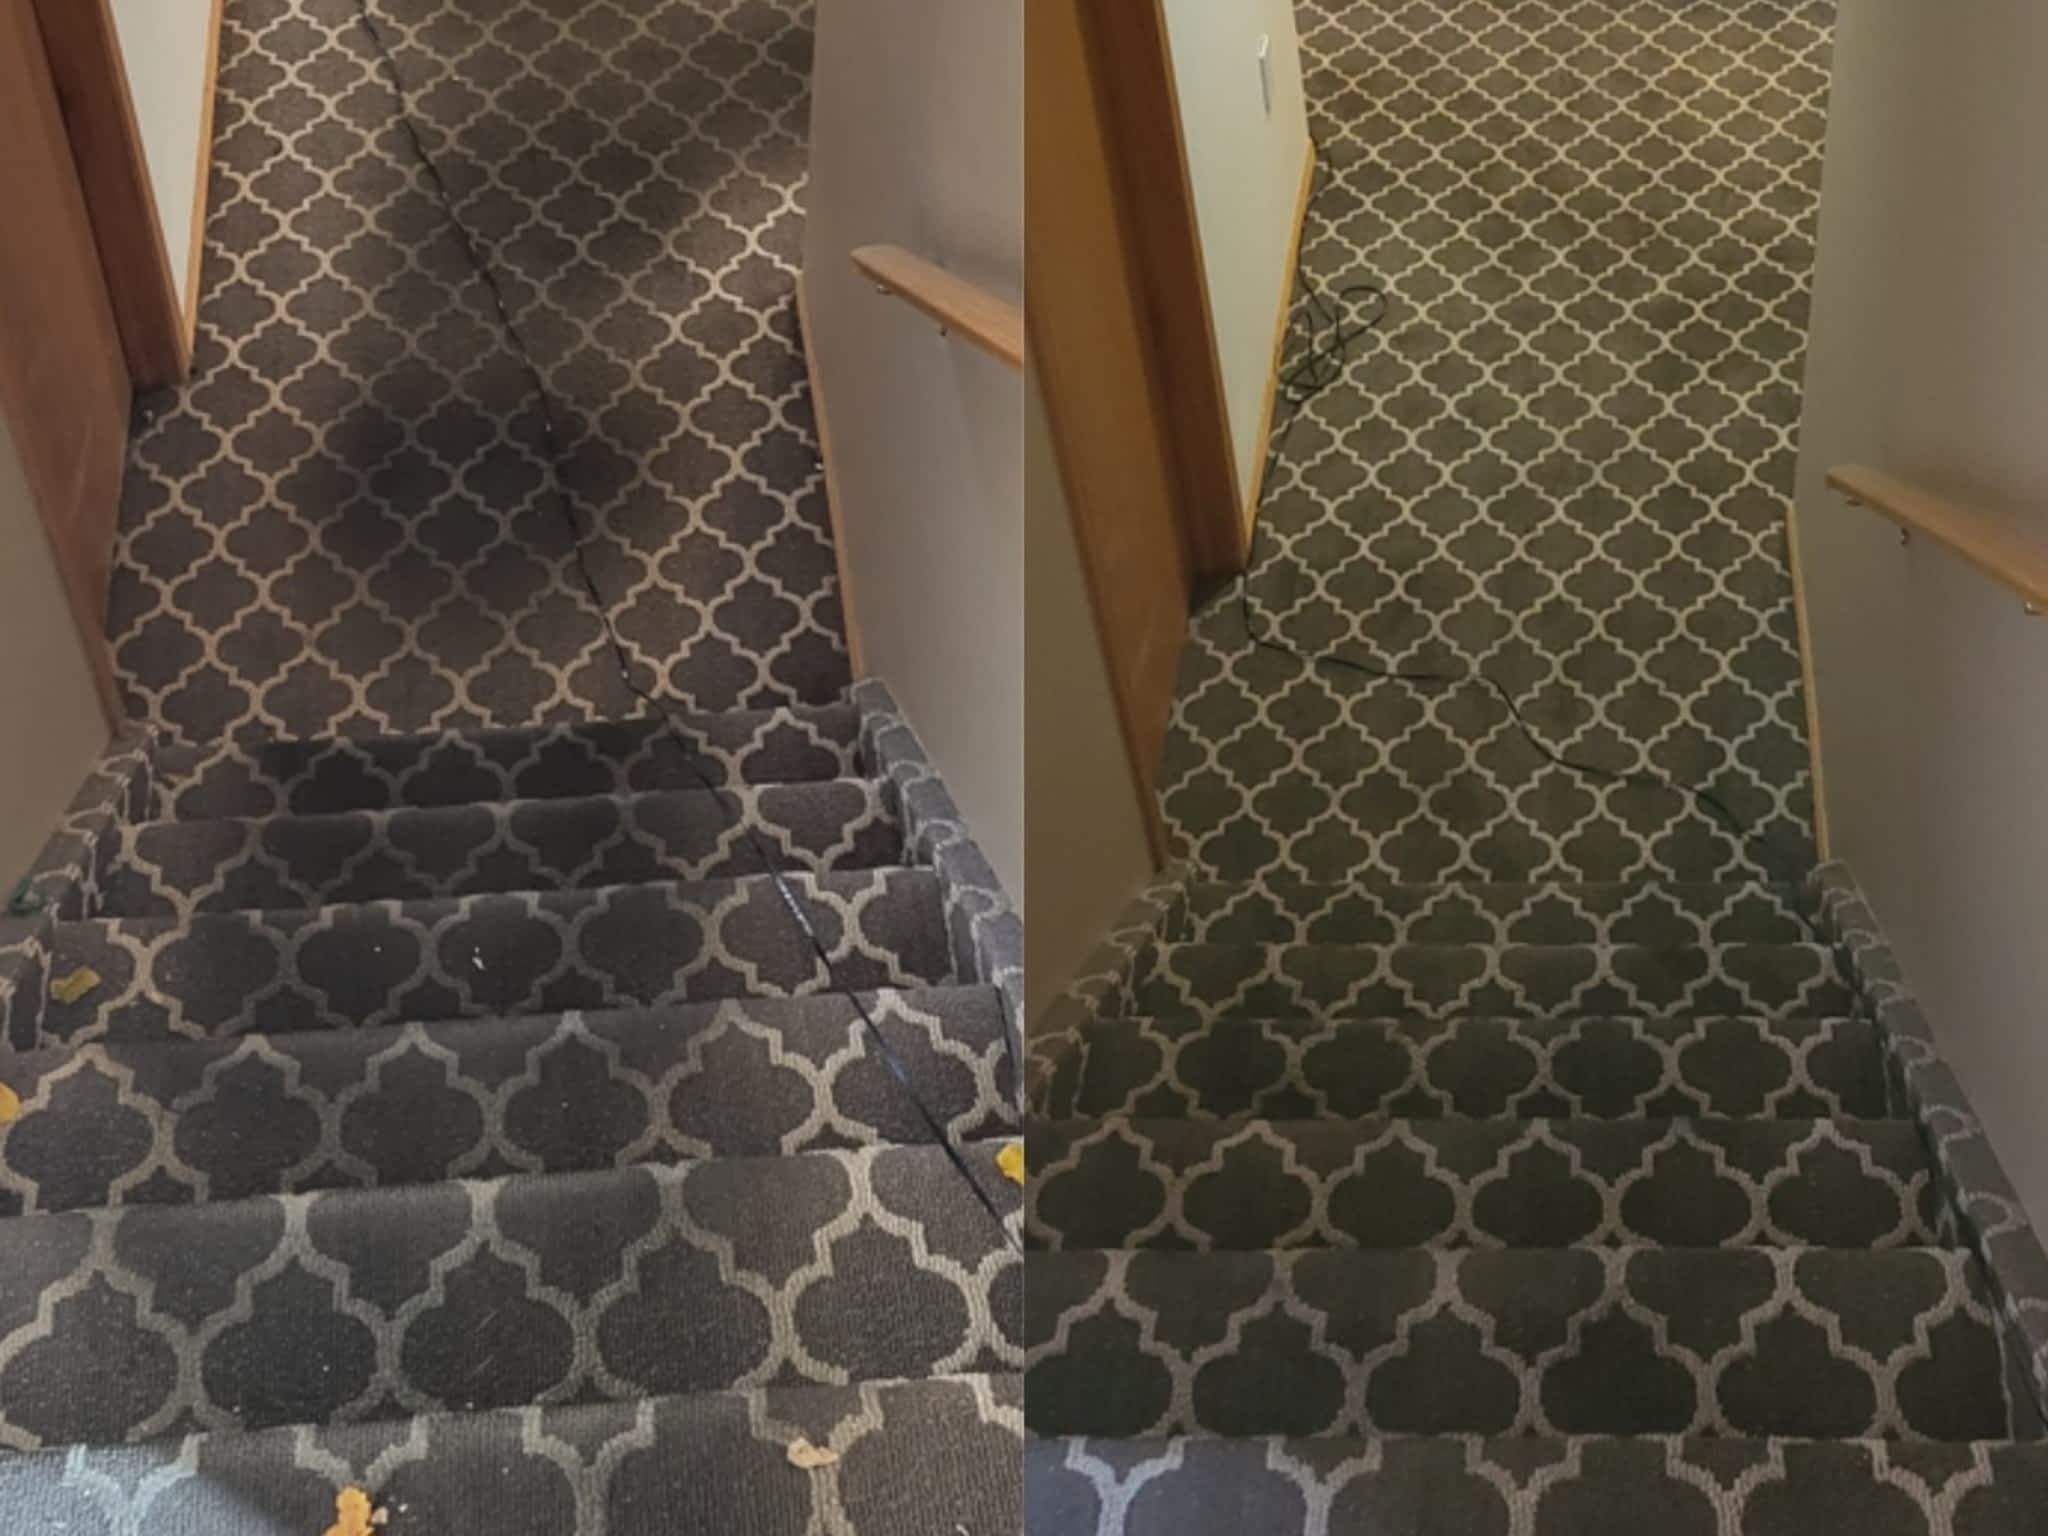 photo Green Hippo Carpet and Floor Cleaning